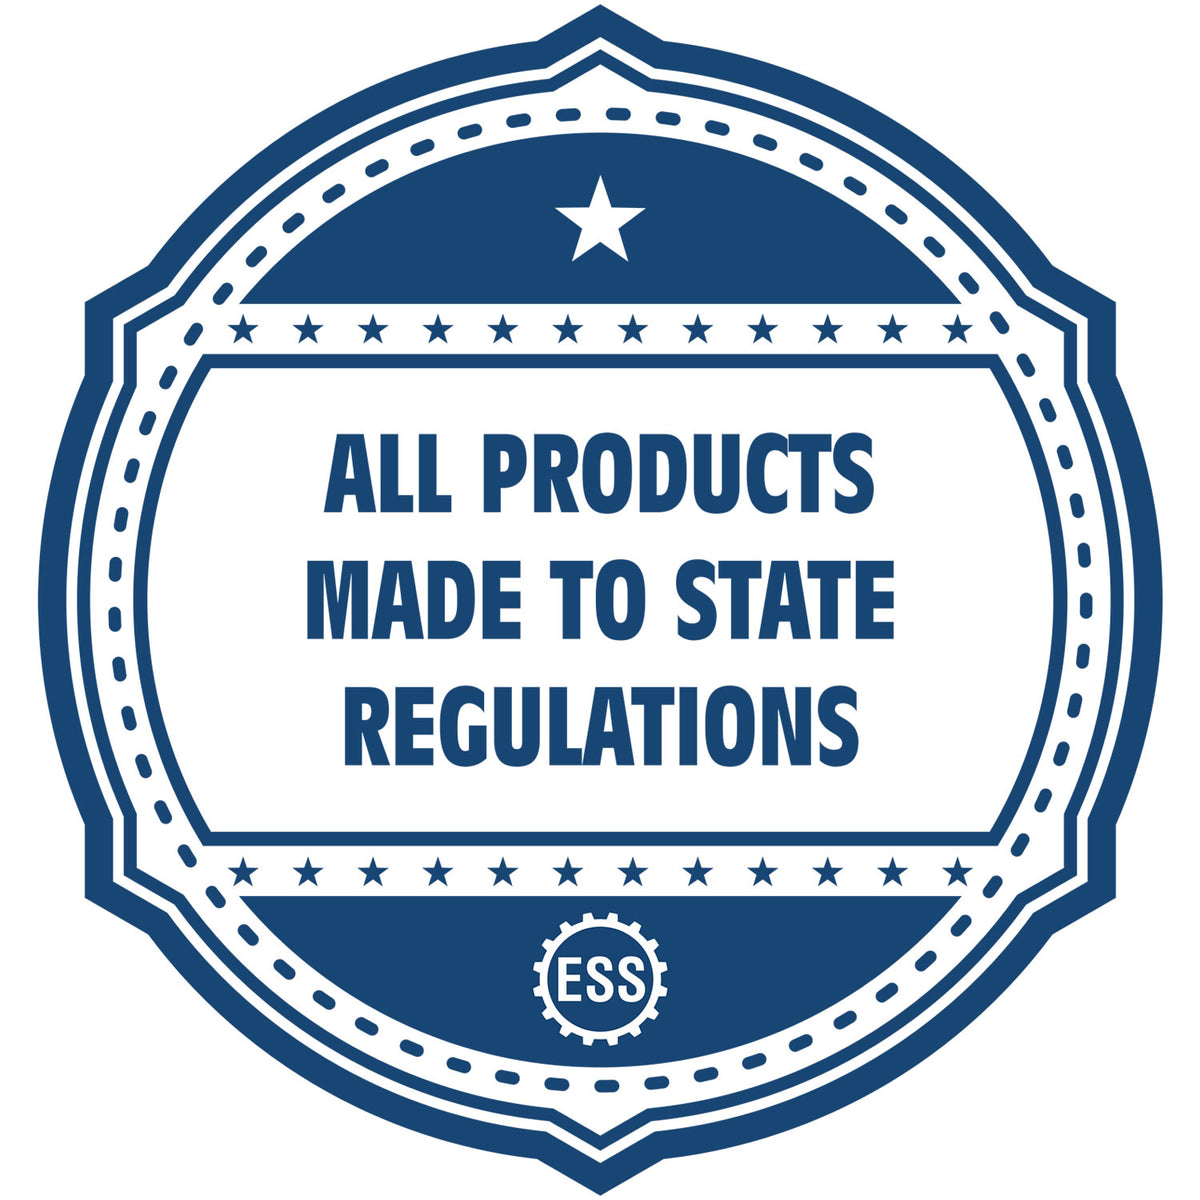 An icon or badge element for the Florida Desk Surveyor Seal Embosser showing that this product is made in compliance with state regulations.